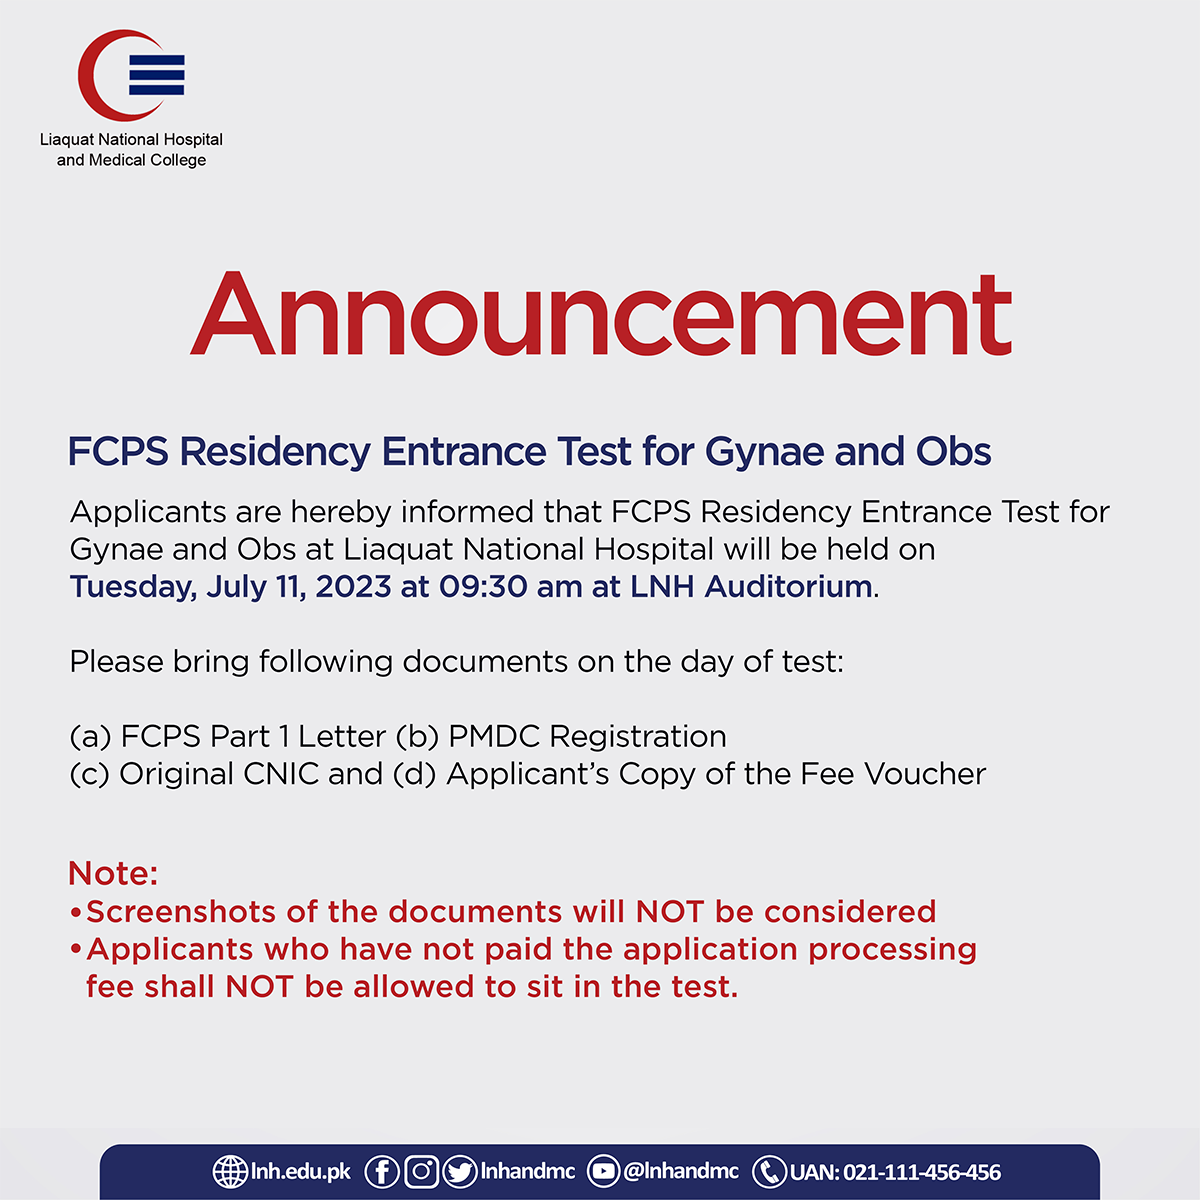 FCPS Residency Entrance Test for Gynae and Obs - July 11, 2023